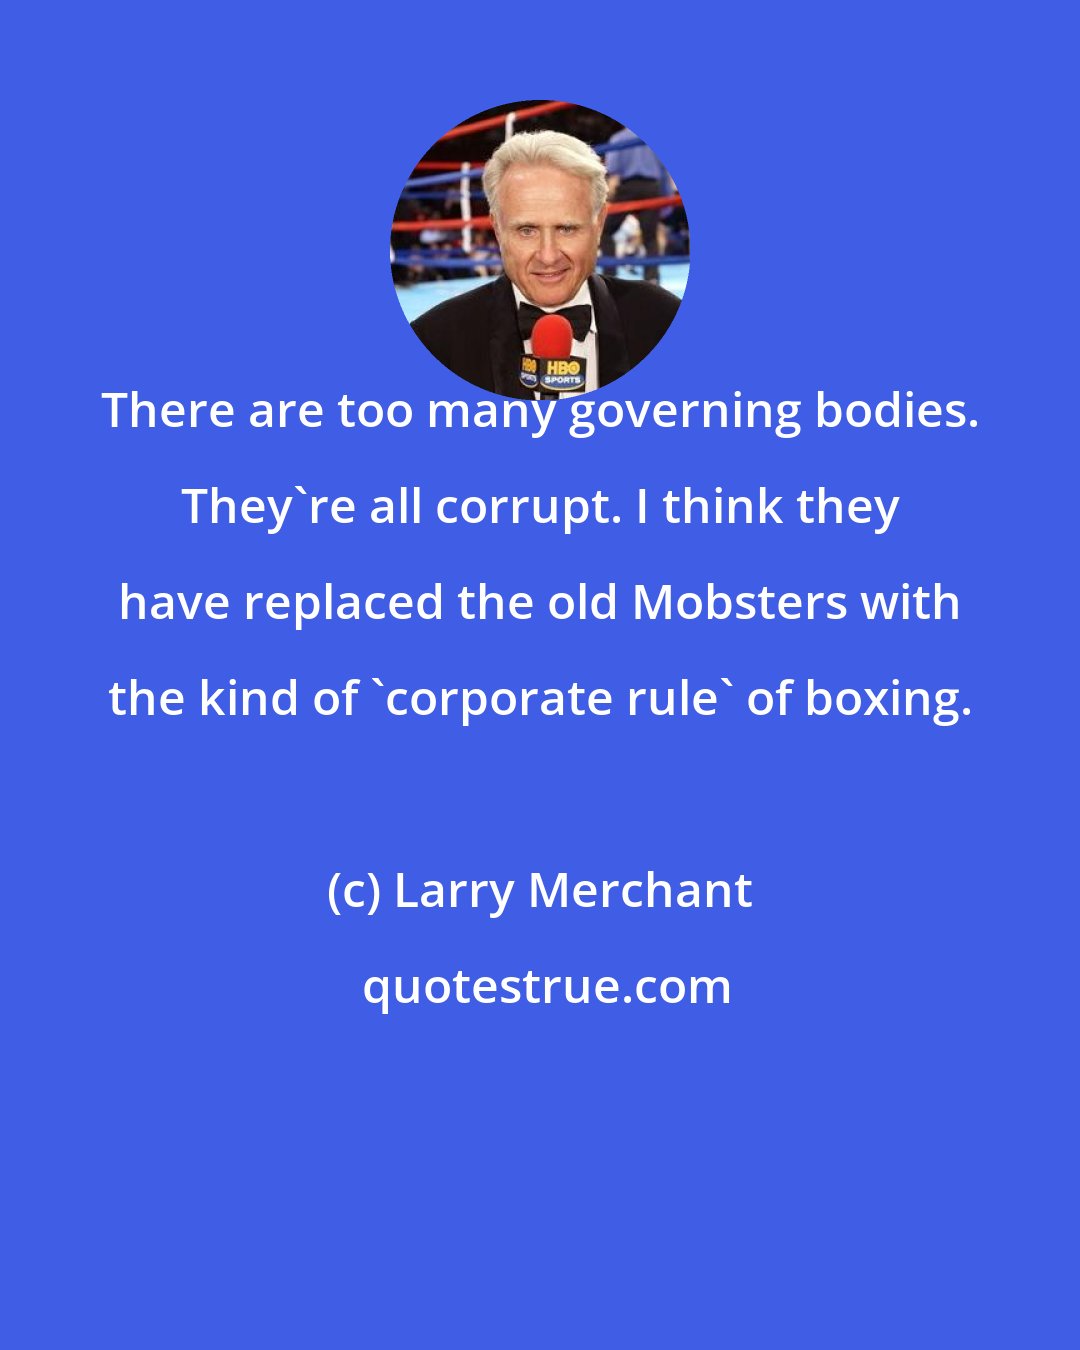 Larry Merchant: There are too many governing bodies. They're all corrupt. I think they have replaced the old Mobsters with the kind of 'corporate rule' of boxing.